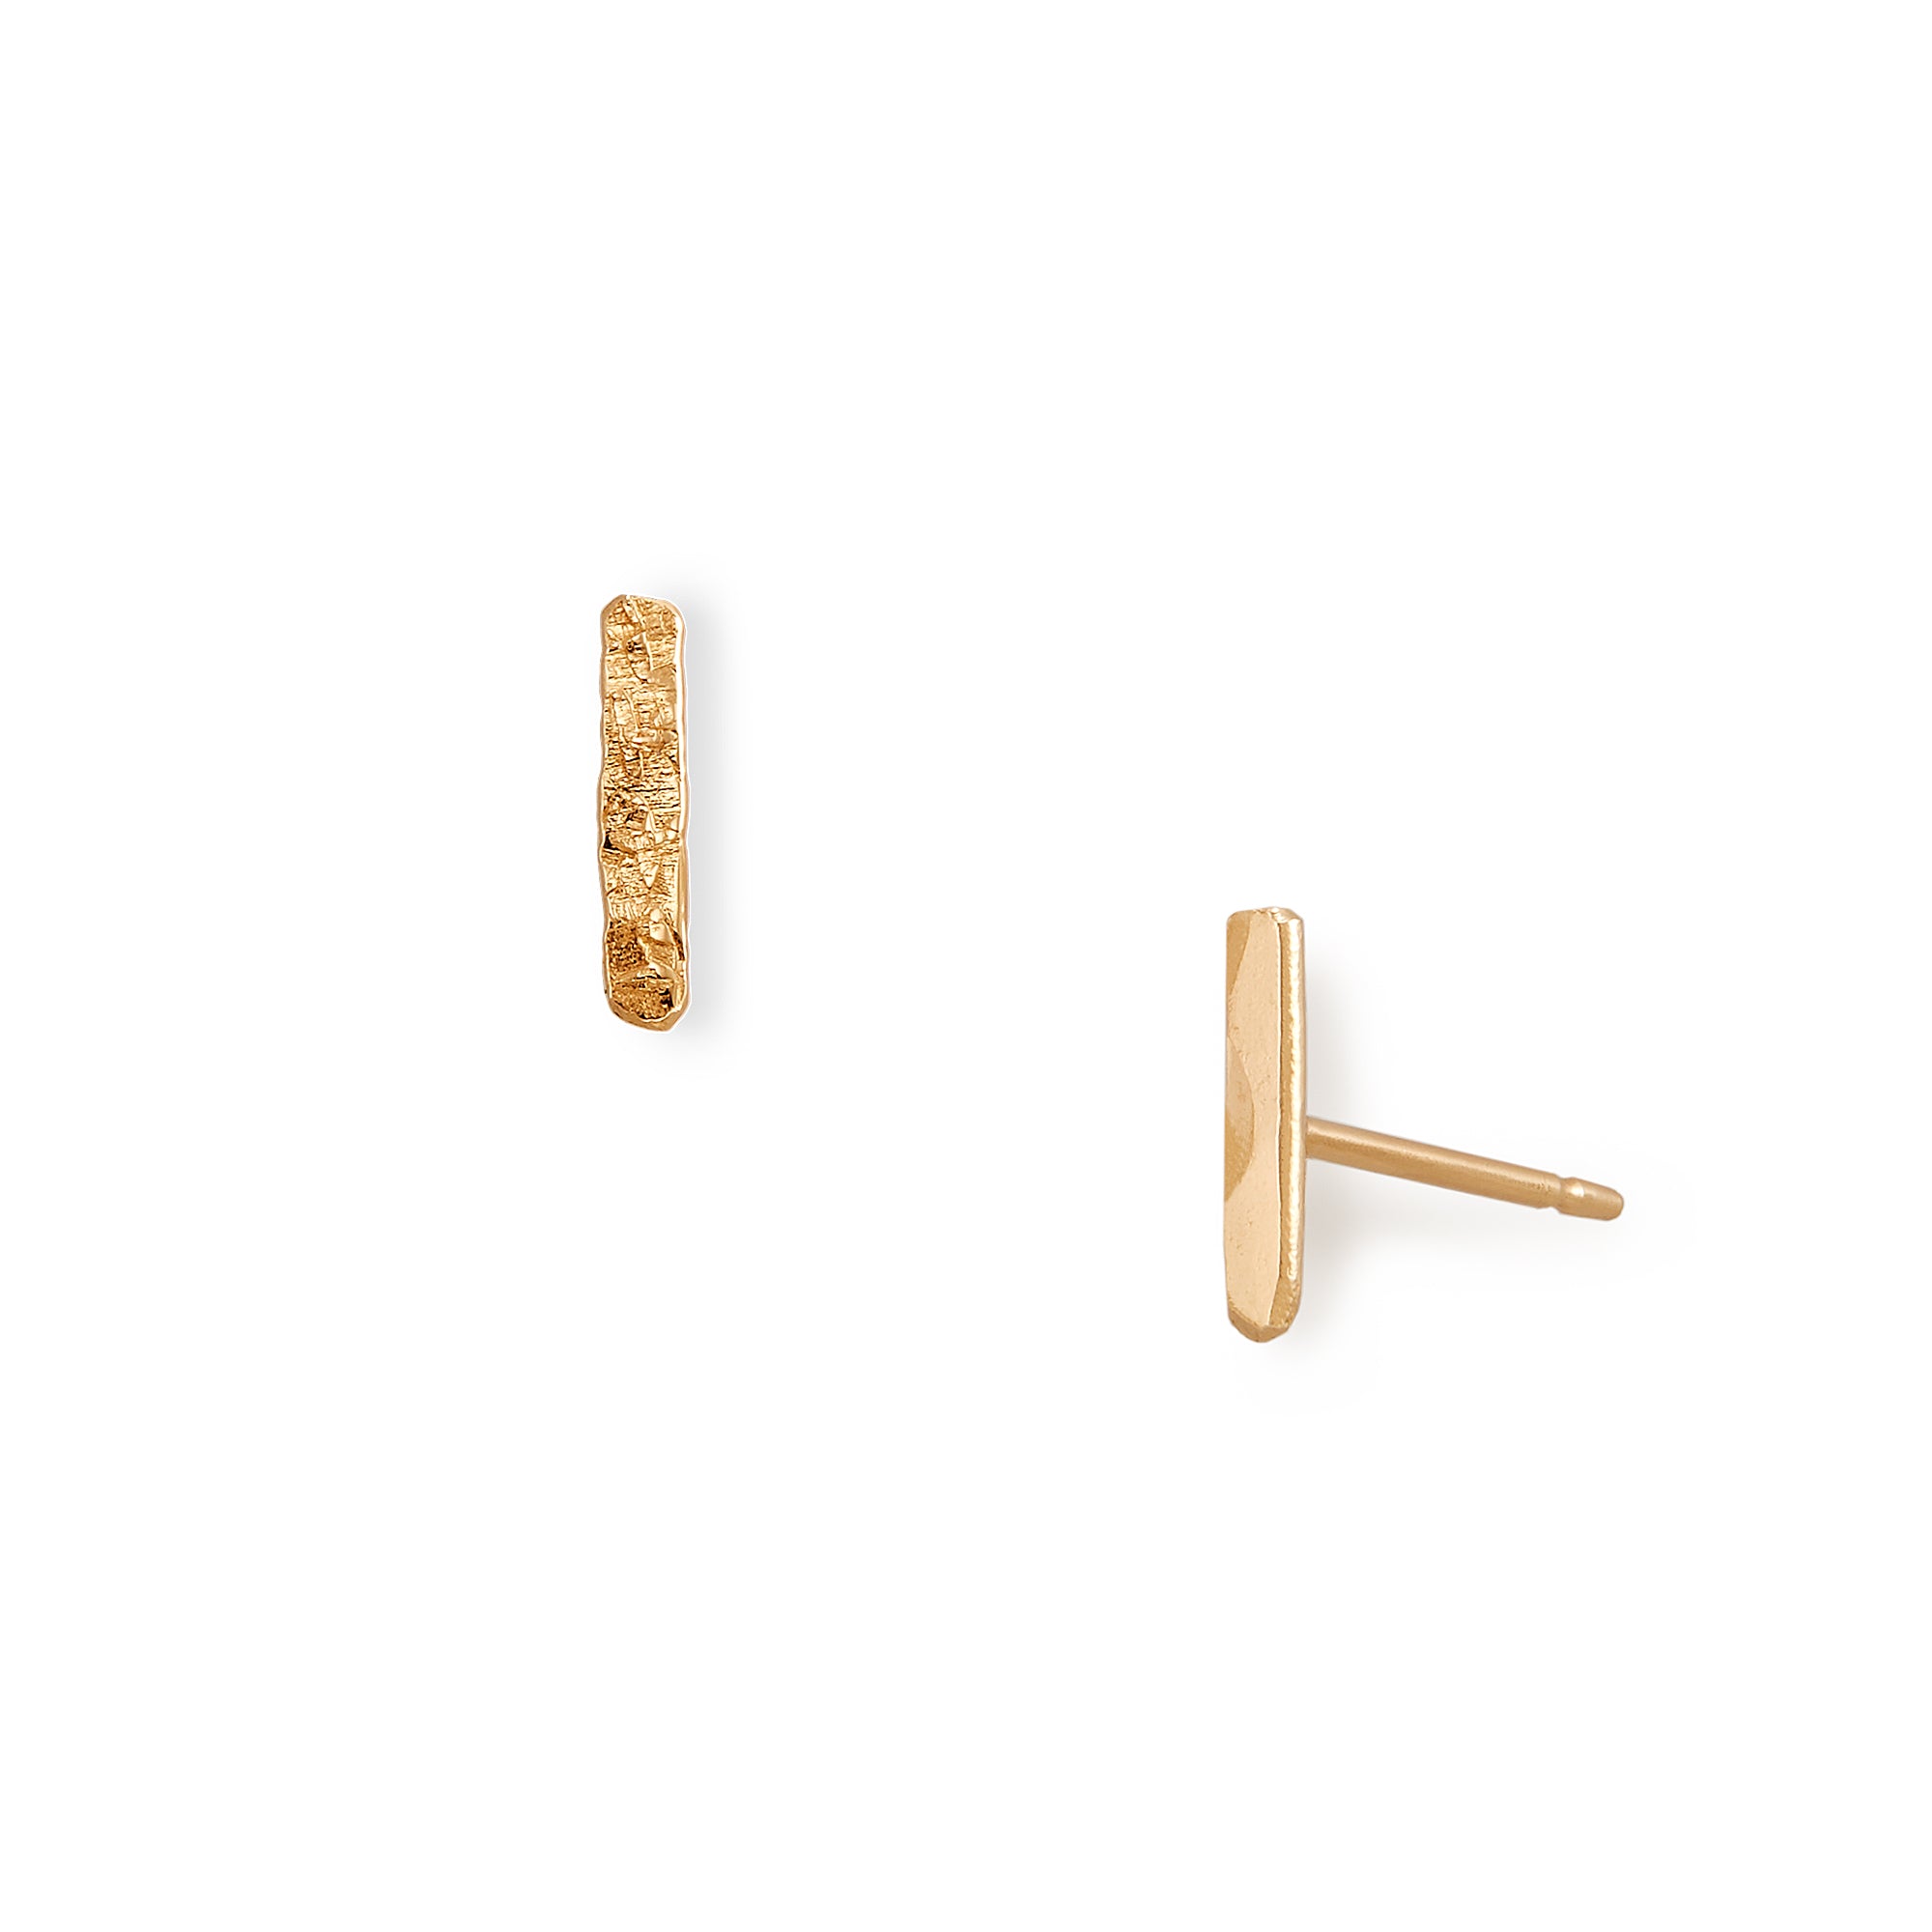 The Dash Stud, modern simplicity in 14k gold with your choice of classic hammered textured or nugget texture